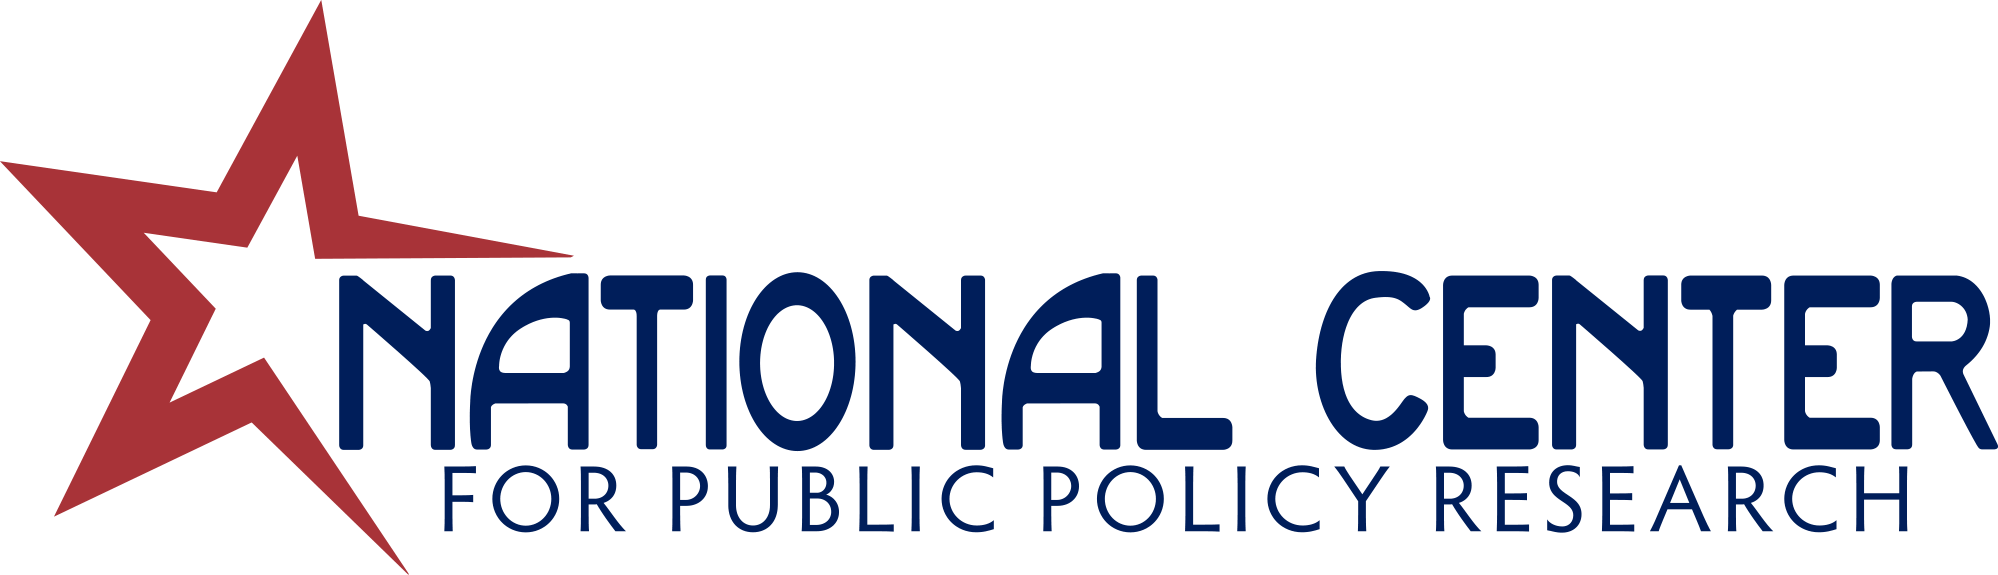 national center for public policy research logo